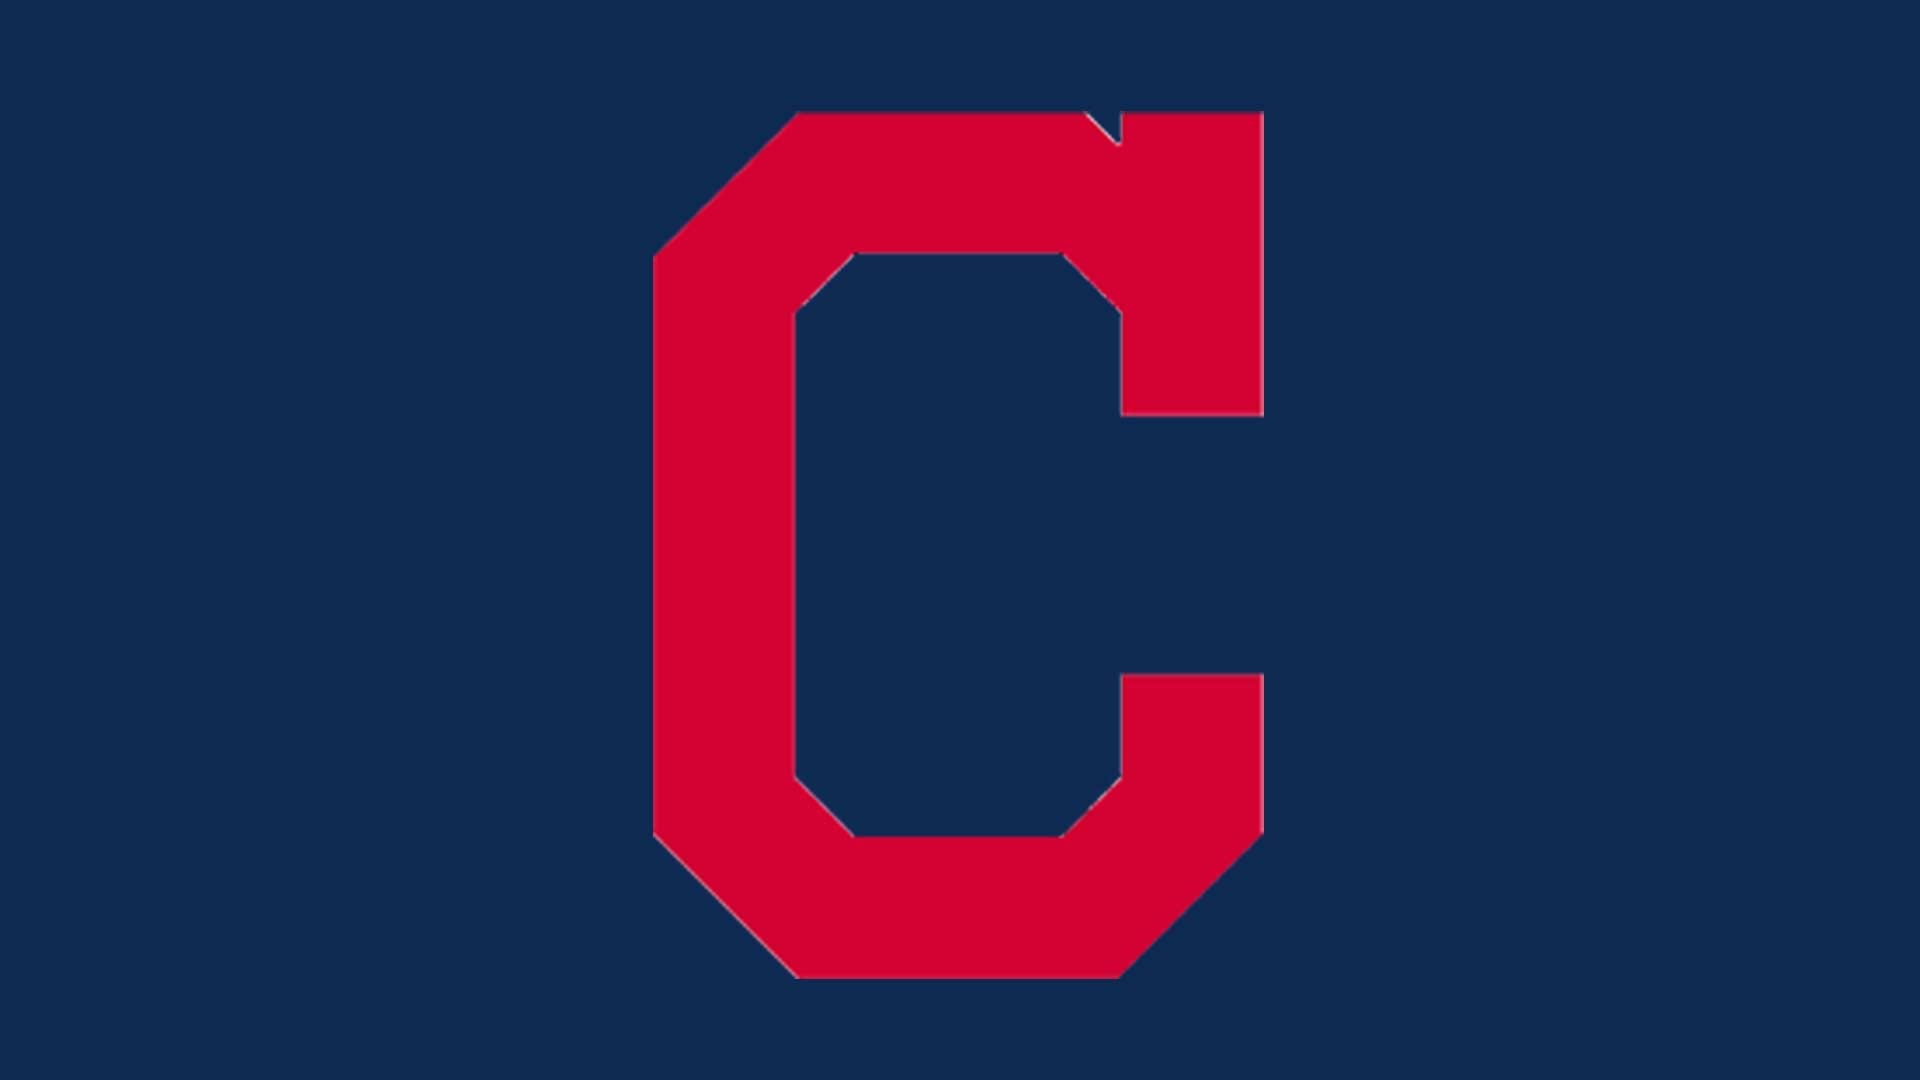 Cleveland Indians to 'determine best path forward' with regards to